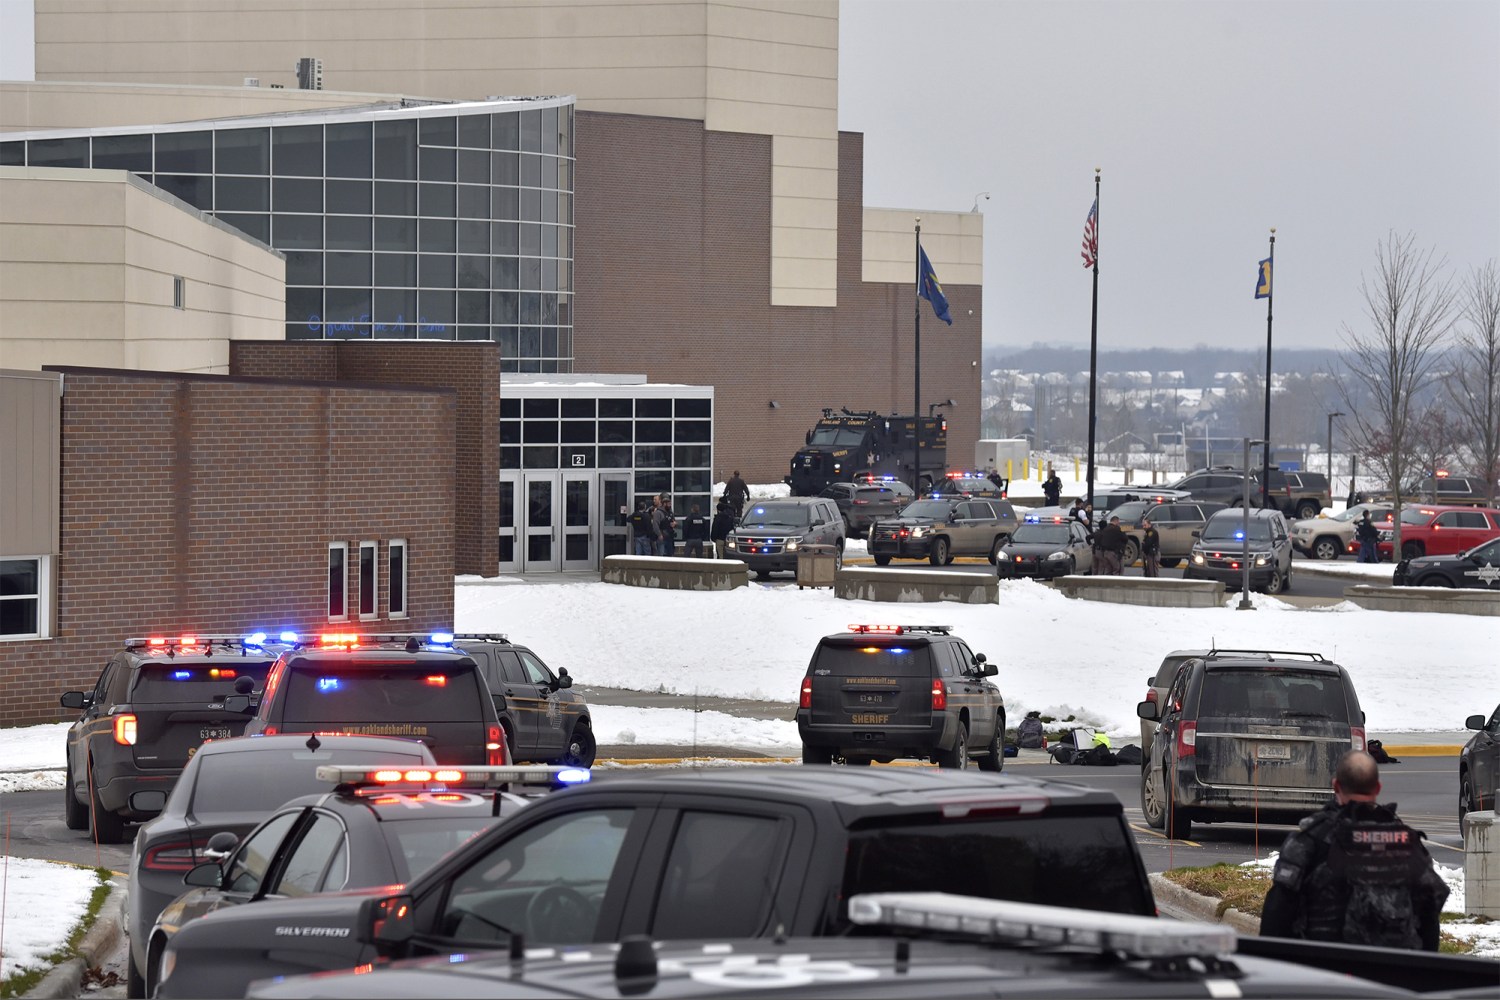 Michigan High School Gunman Ethan Crumbley, 15, Is Arraigned As An Adult Terrorist As Police Reveal He Had Meeting With His Parents And Teachers To 'discuss His Behavior' Three Hours Before He Opened Fire In Hallways And Killed Four Classmates